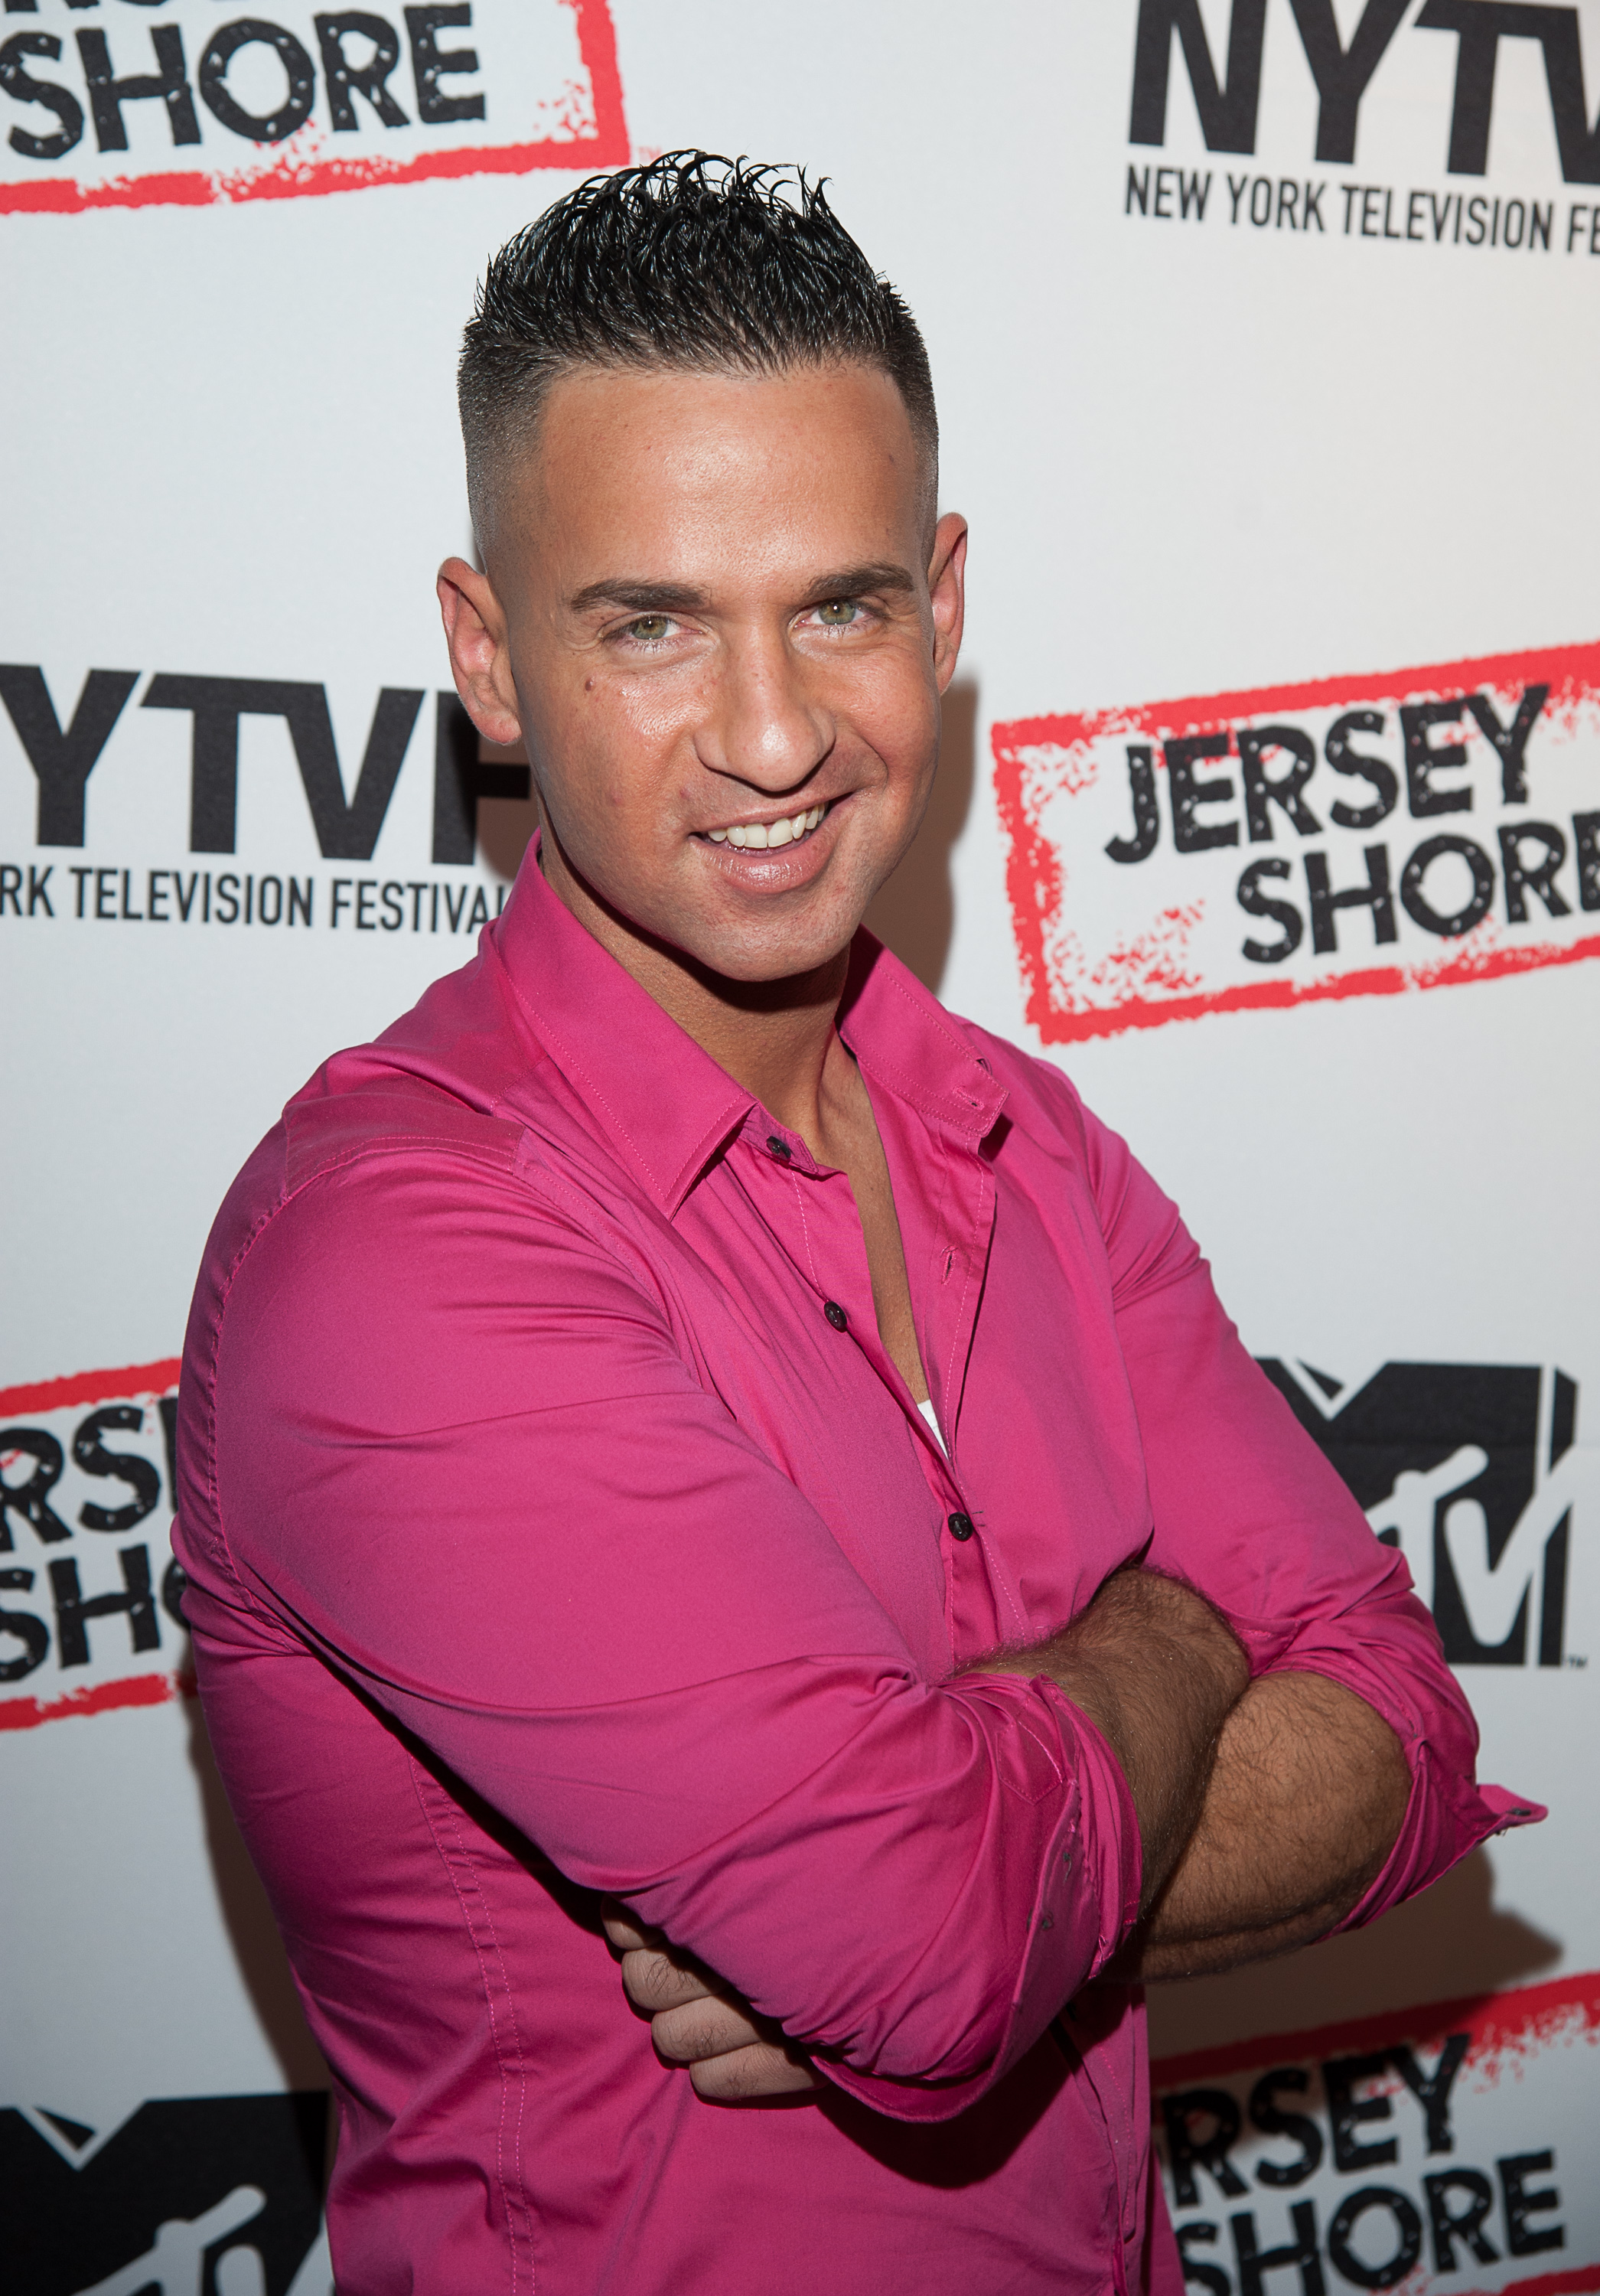 Mike "The Situation" Sorrentino attends "Love, Loss, (Gym, Tan) and Laundry: A Farewell To The Jersey Shore" during the 2012 New York Television Festival at 92Y Tribeca in New York City on October 24, 2012.